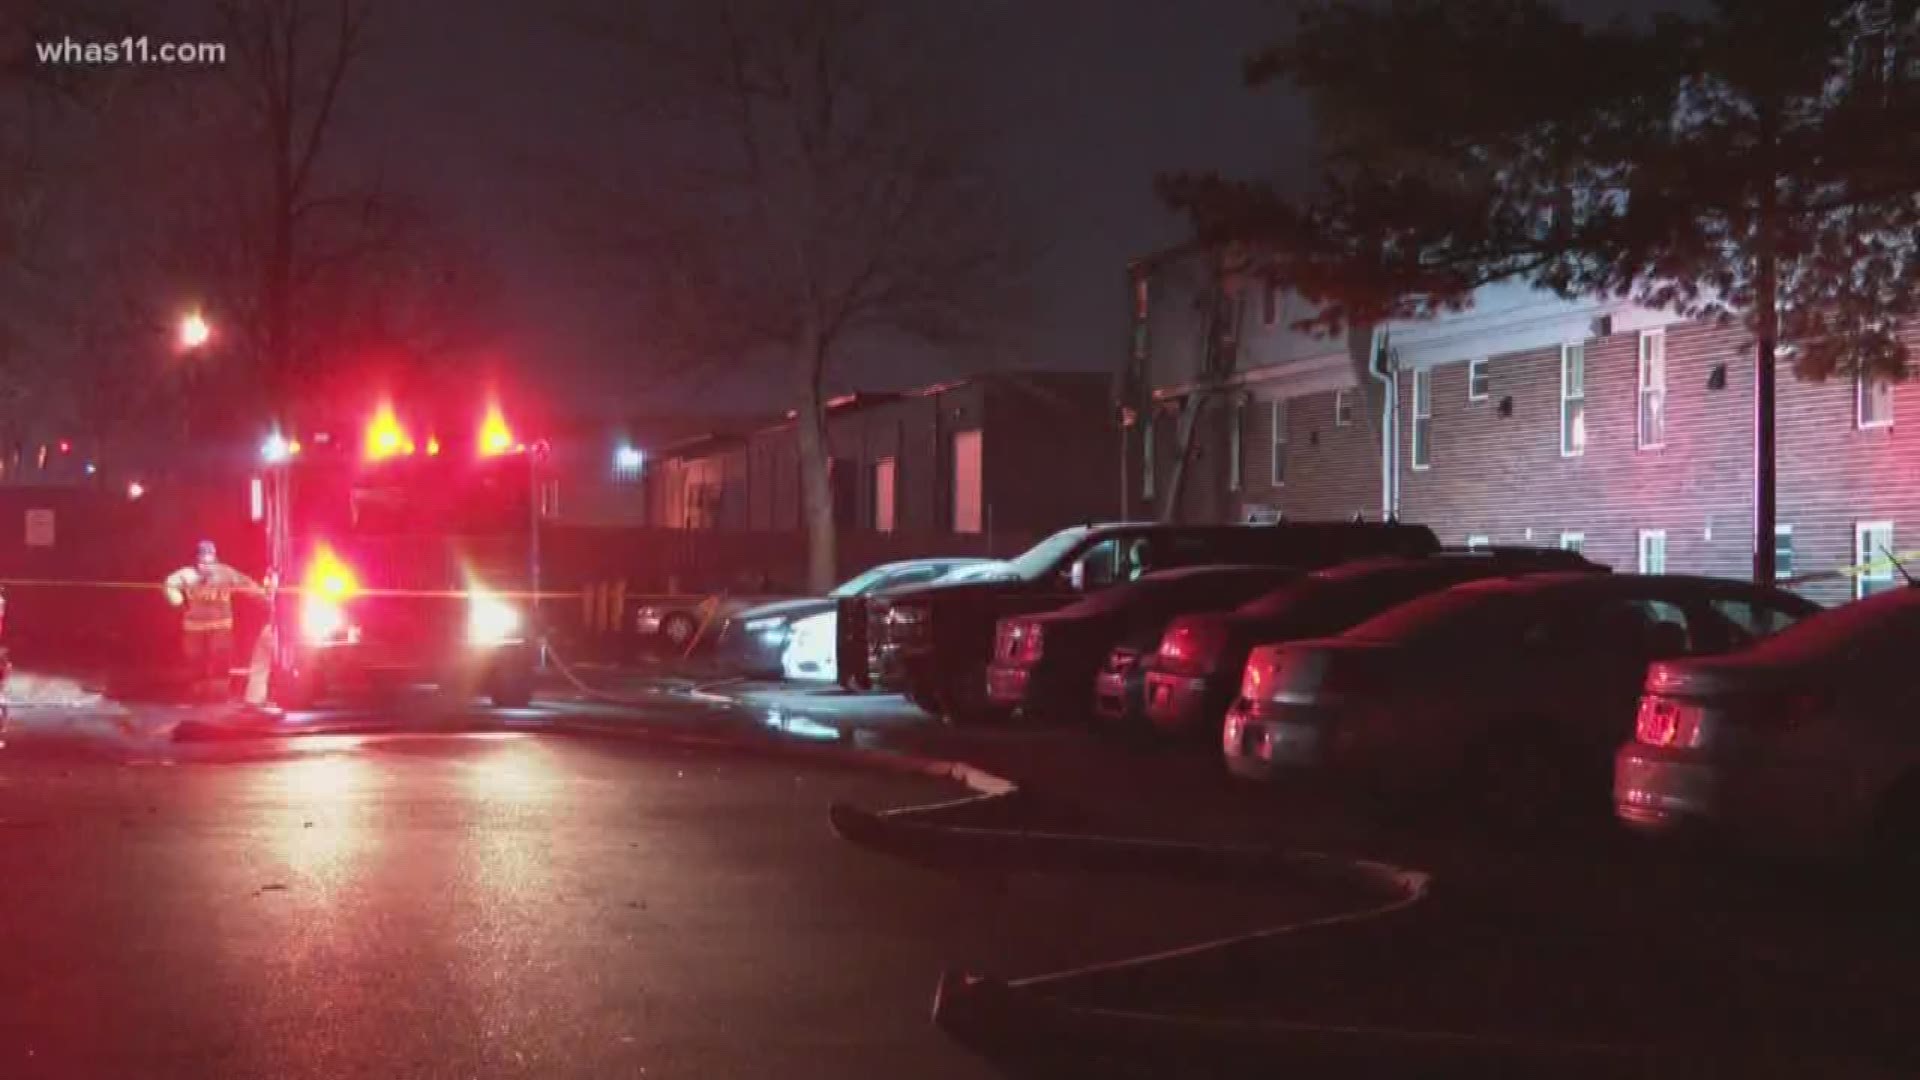 Authorities are investigating after a fire in Douglas Park claim the lives of two people Sunday.